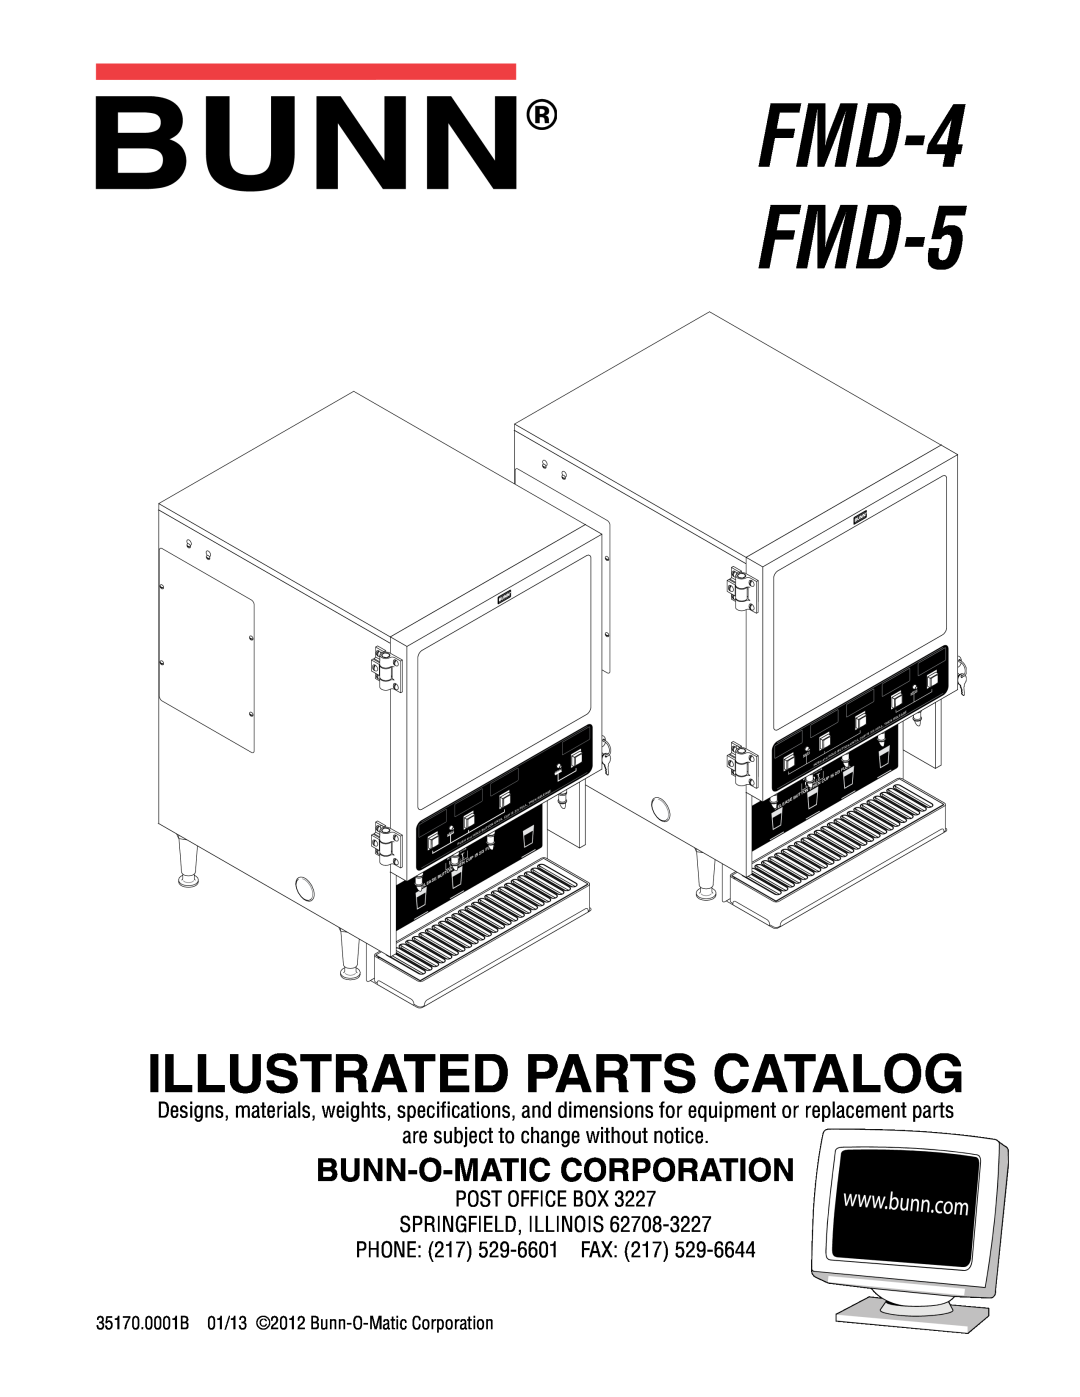 Bunn specifications are subject to change without notice, Post Office Box Springfield, Illinois, FMD-4 FMD-5 